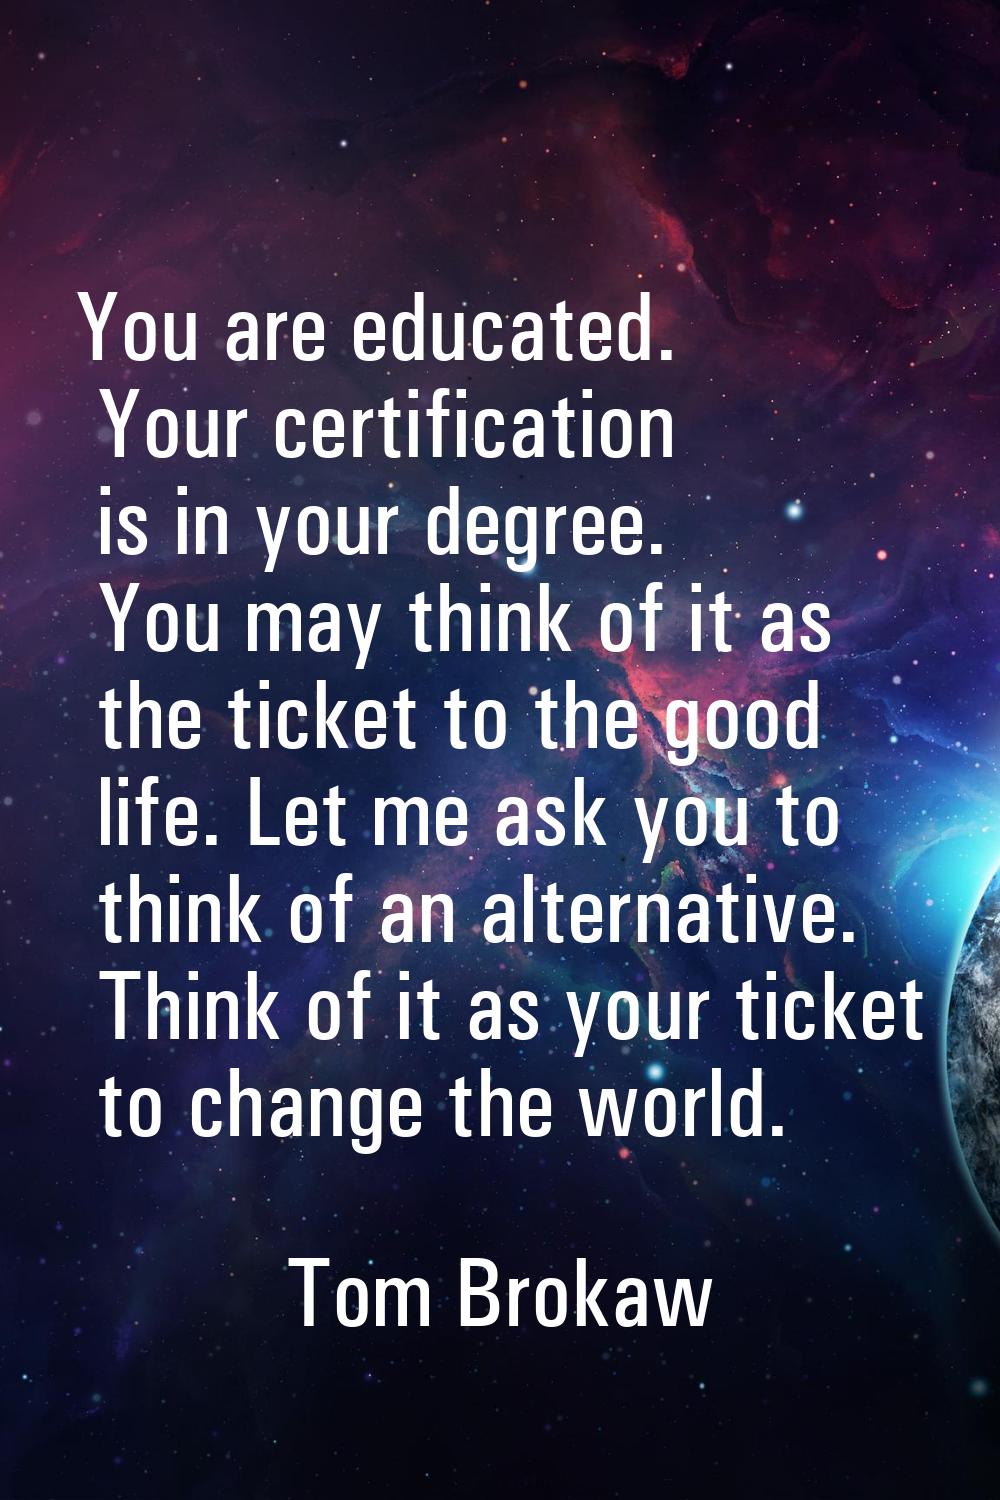 You are educated. Your certification is in your degree. You may think of it as the ticket to the go